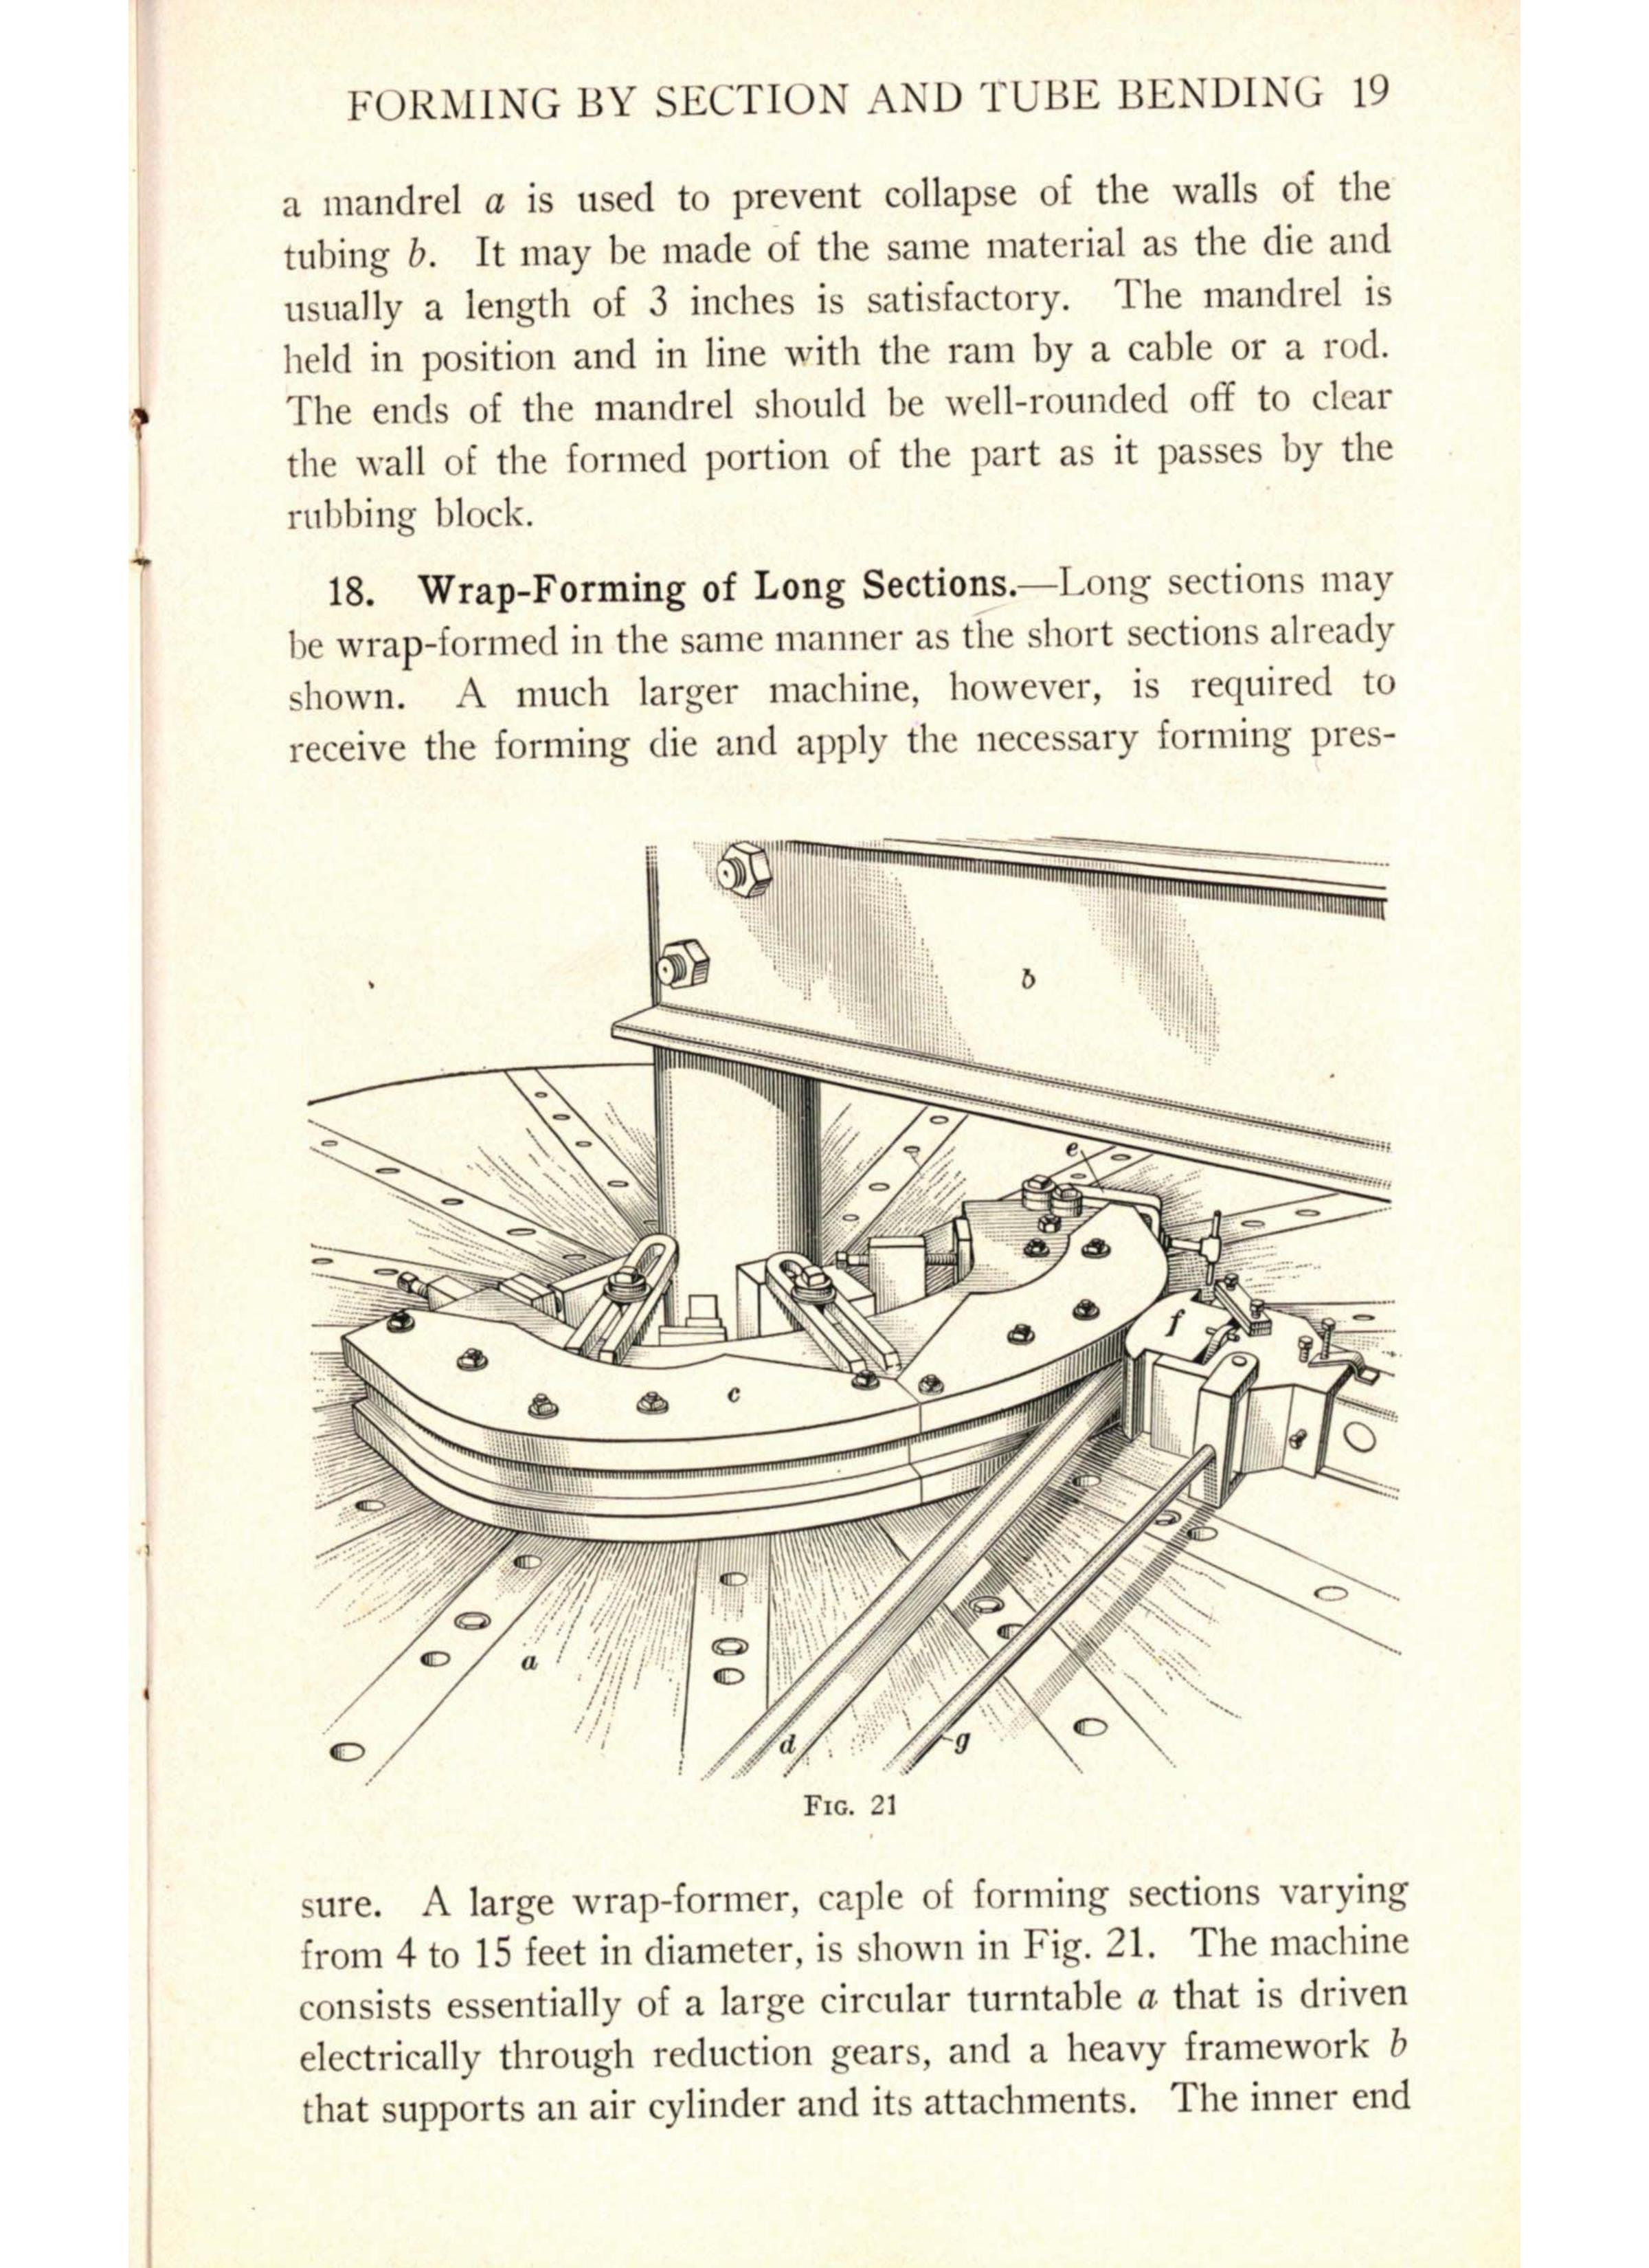 Sample page 21 from AirCorps Library document: Forming Methods - Forming by Section & Tube Bending - Bureau of Aeronautics